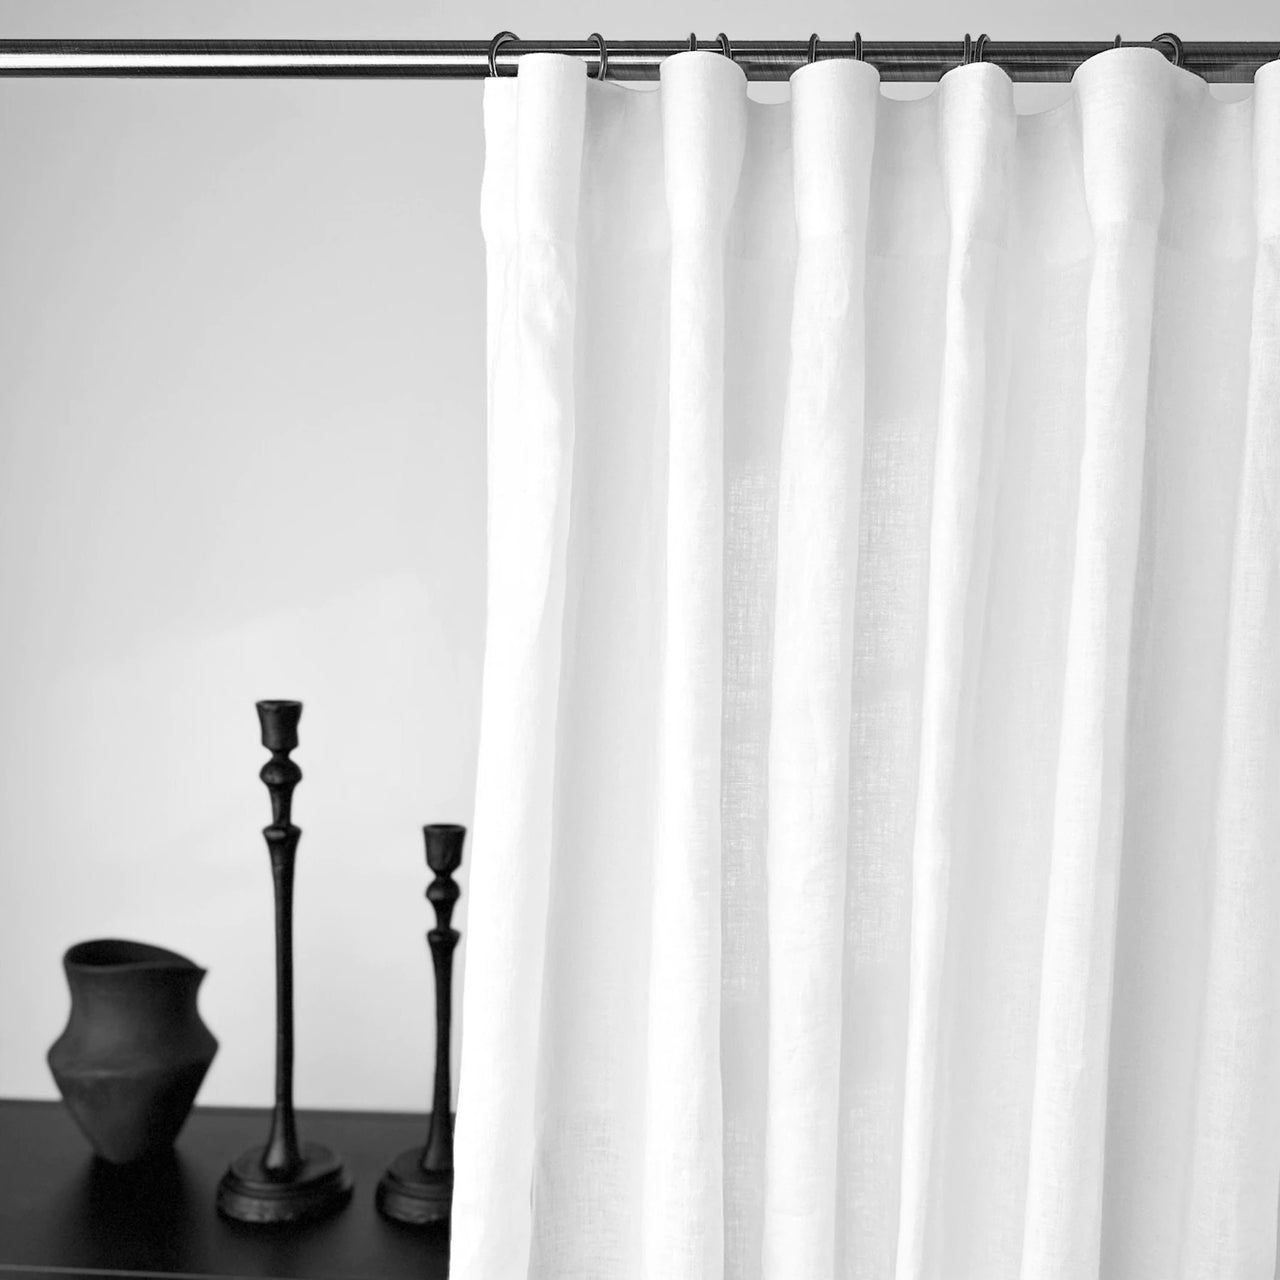 S-Fold Linen Curtain Panel with Cotton or Blackout Lining - Suitable for Rings and Hooks or Track